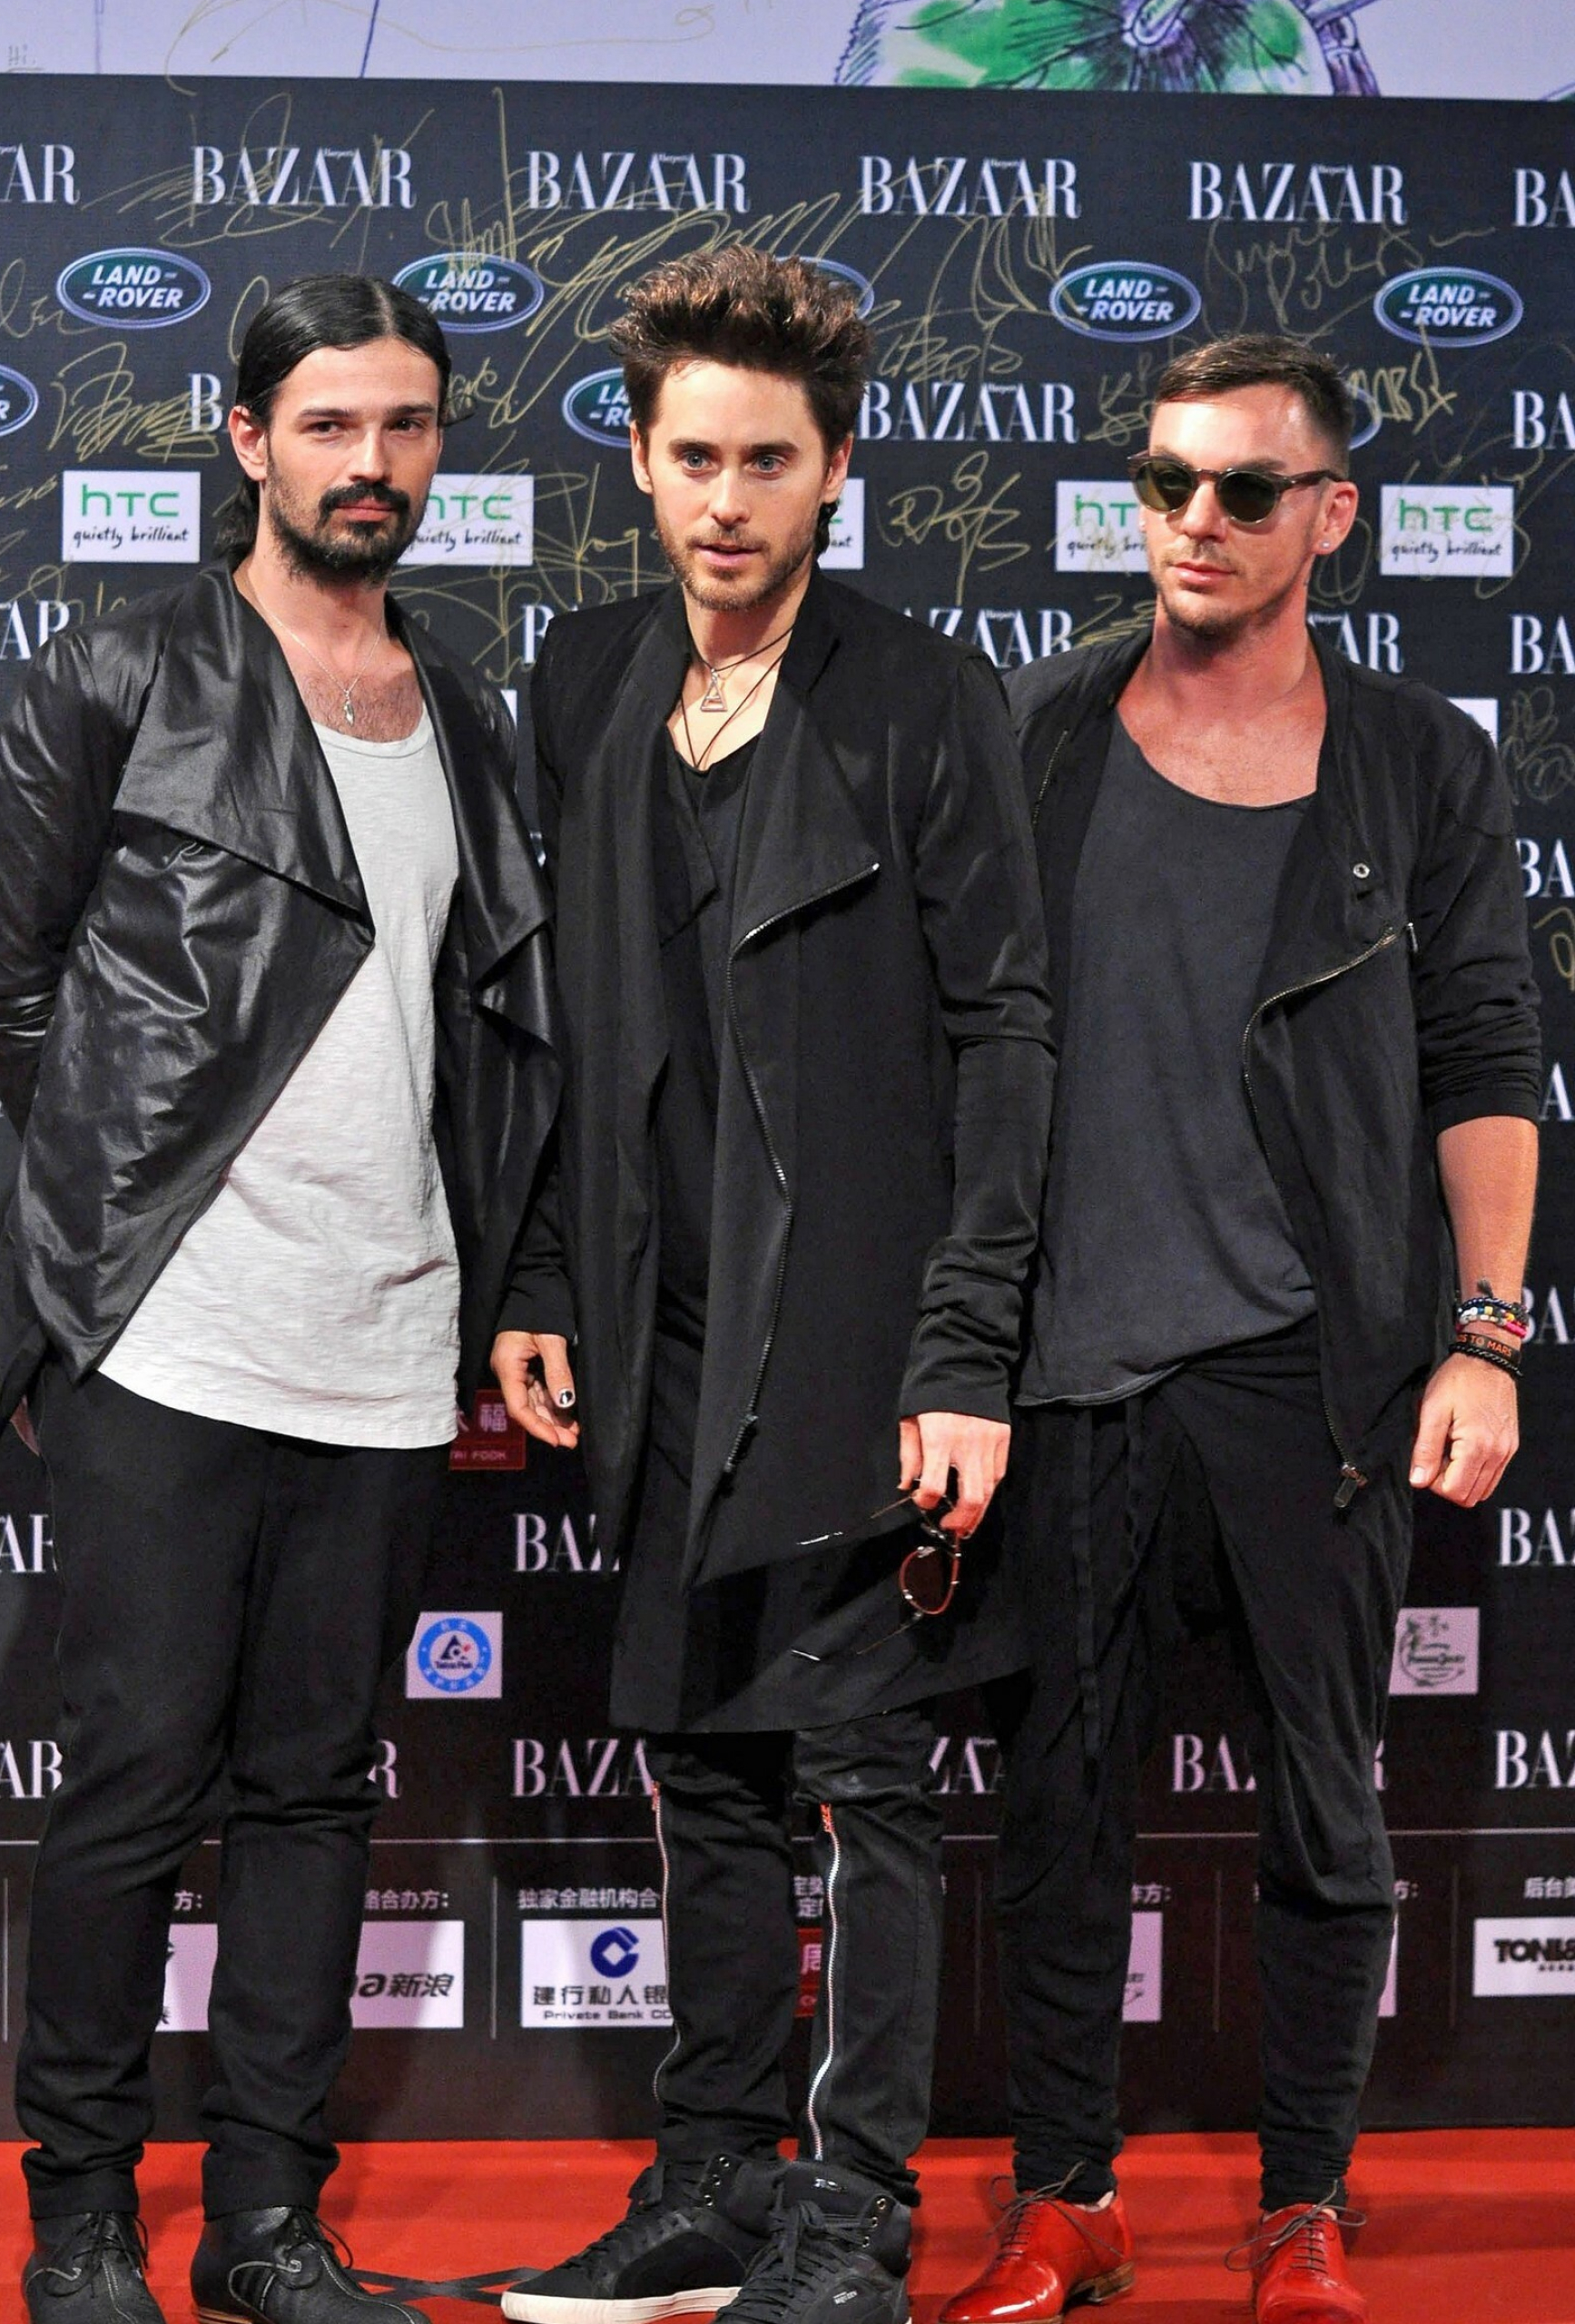 Thirty Seconds to Mars: Bazaar Charity Night, Tomo Milicevic, Jared Leto, and Shannon Leto. 1740x2560 HD Wallpaper.